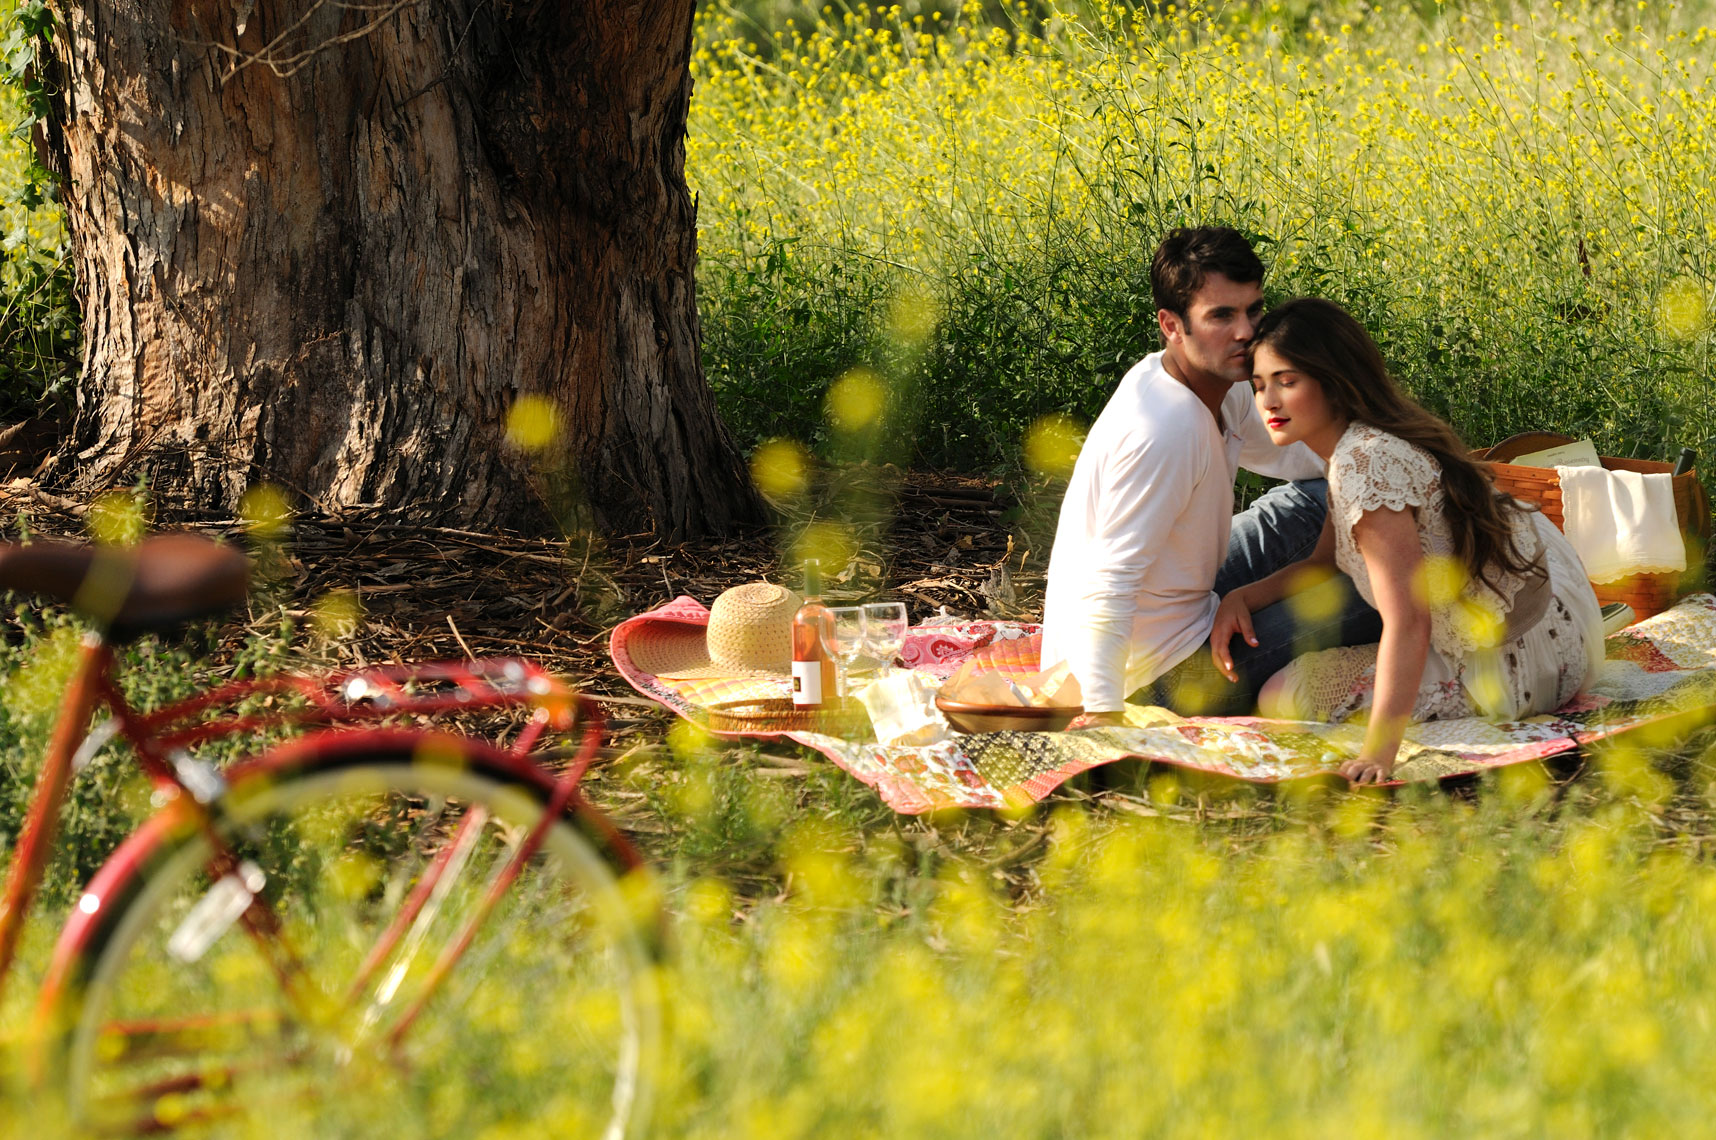 Young-couple-enjoying-springtime-picnic-in-field-of-yellow-flowers-by-lifestyle-photographer-Joe-Atlas.